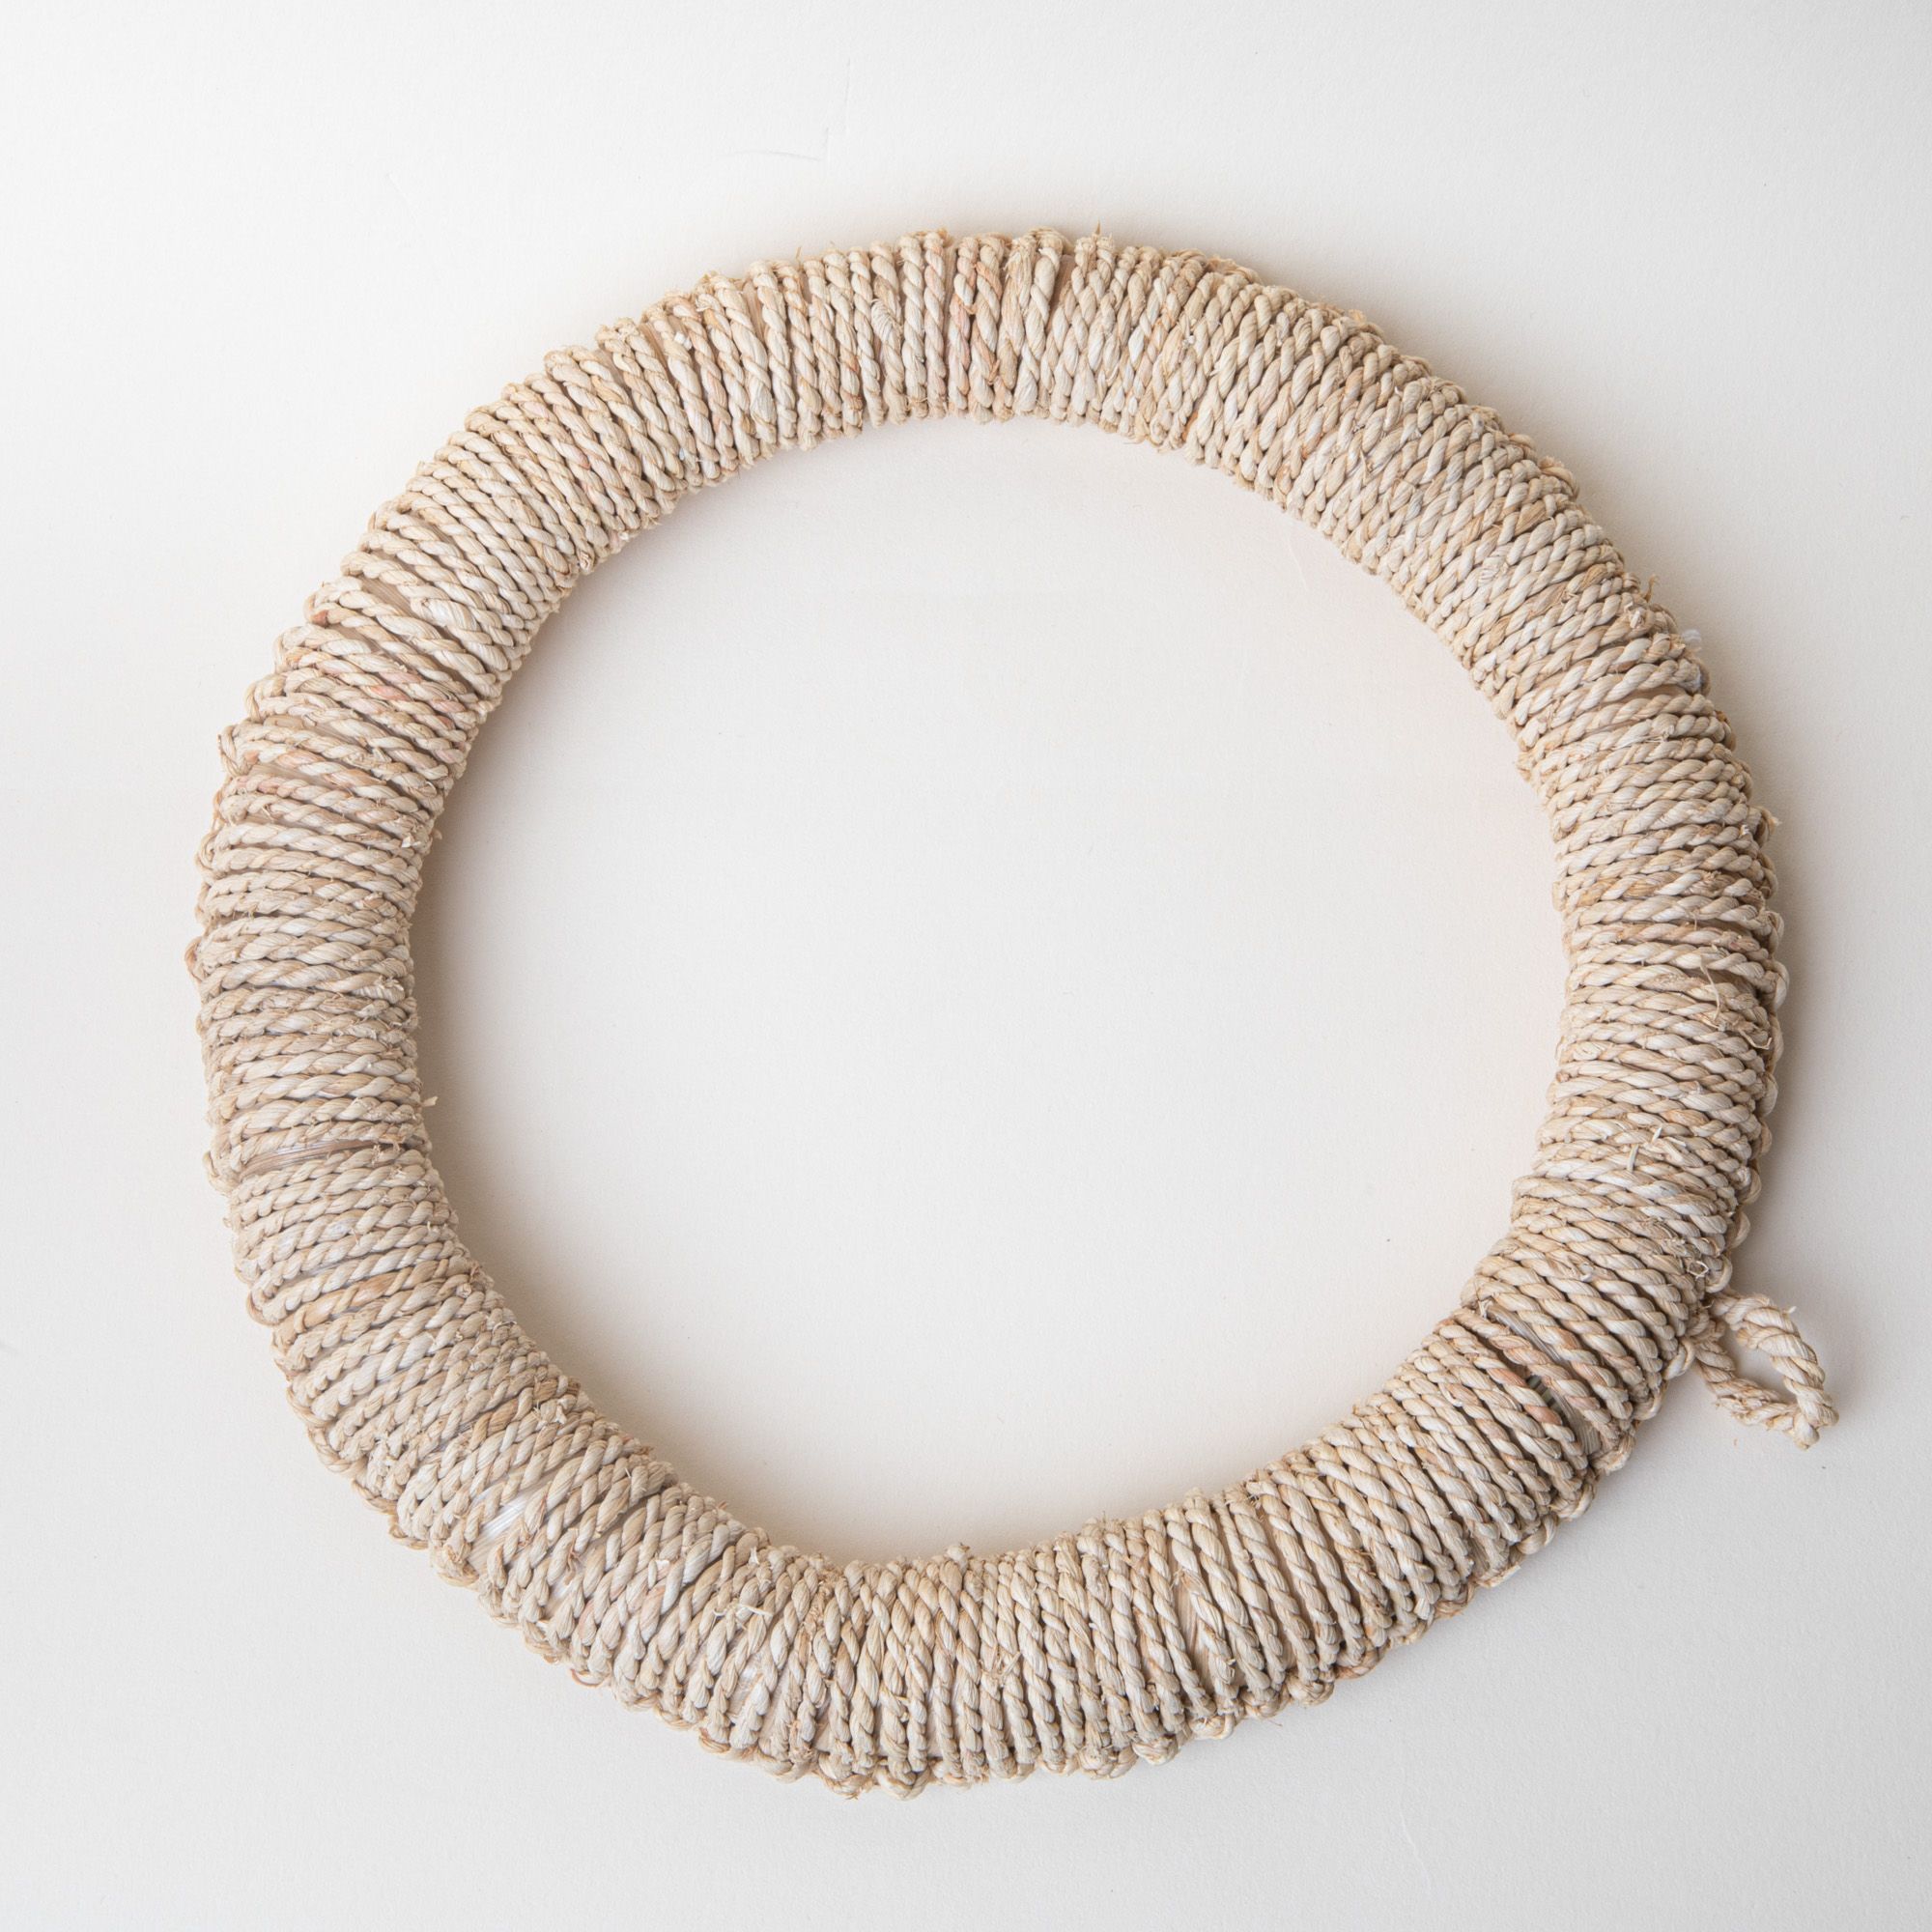 Circle ring trivet wrapped in woven organic material in a neutral color.